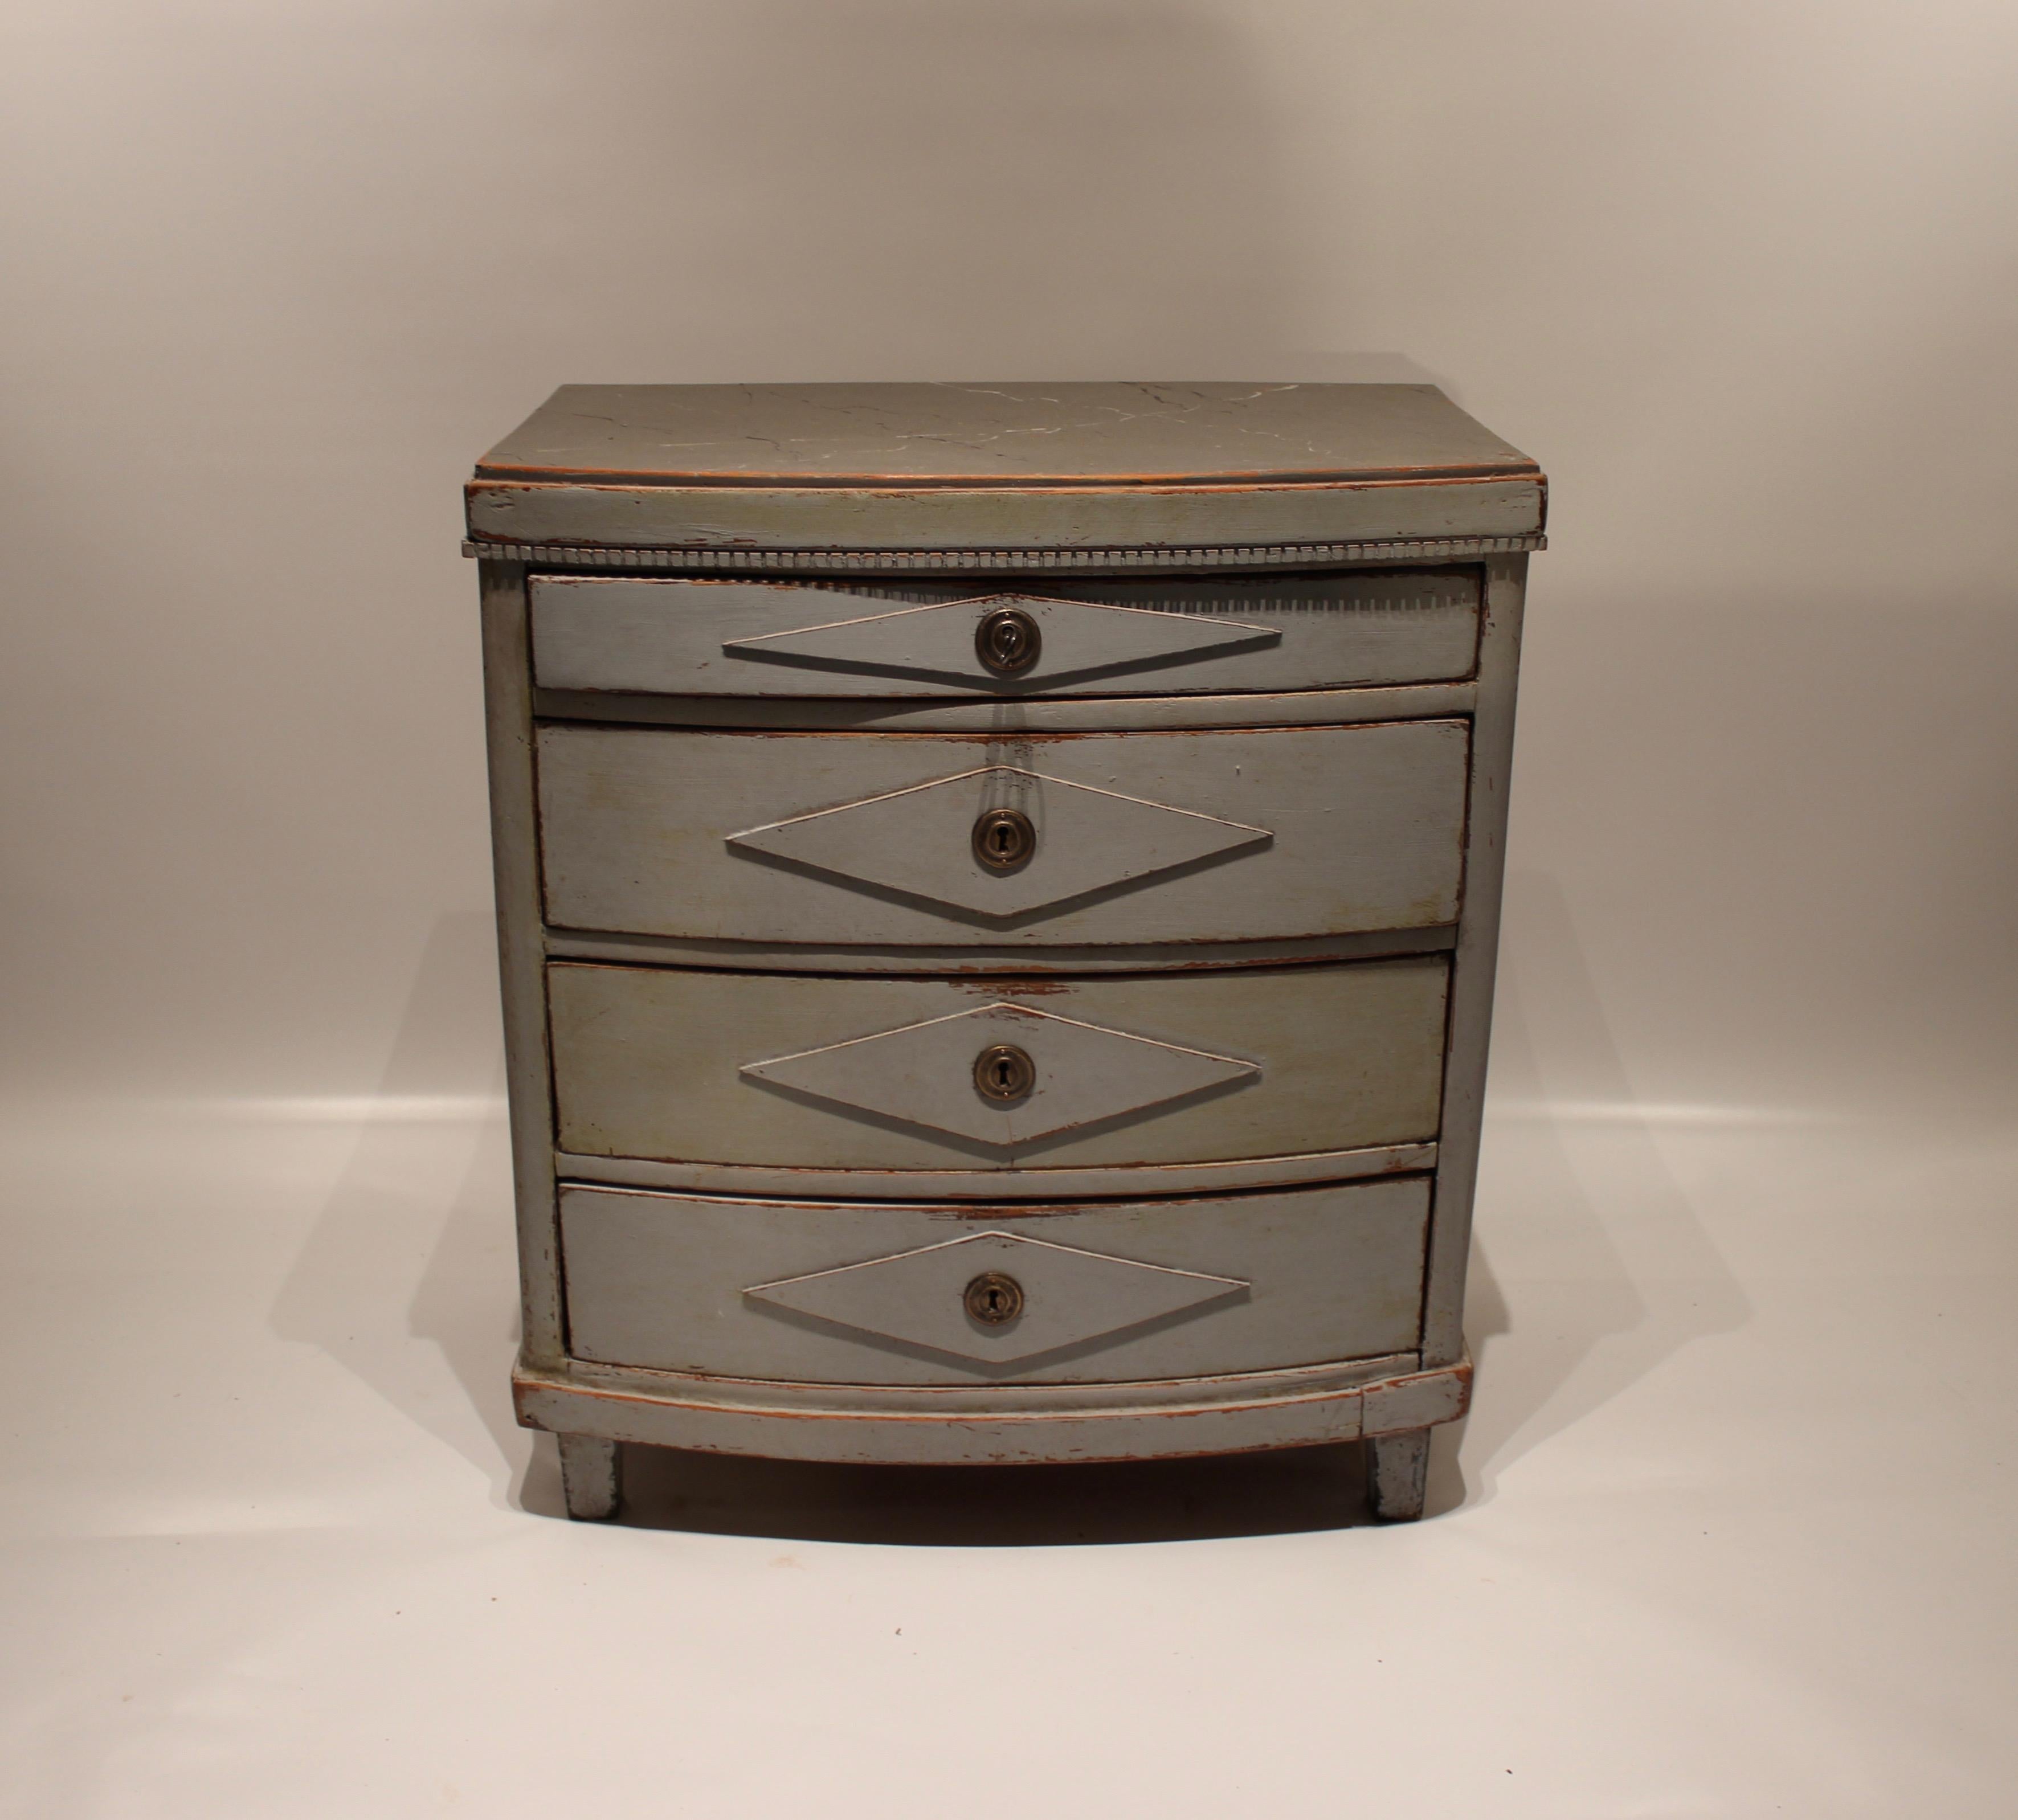 Gustavian grey painted chest of drawers with curved front and marbled topplate from the 1830s. The chest is in great vintage condition.